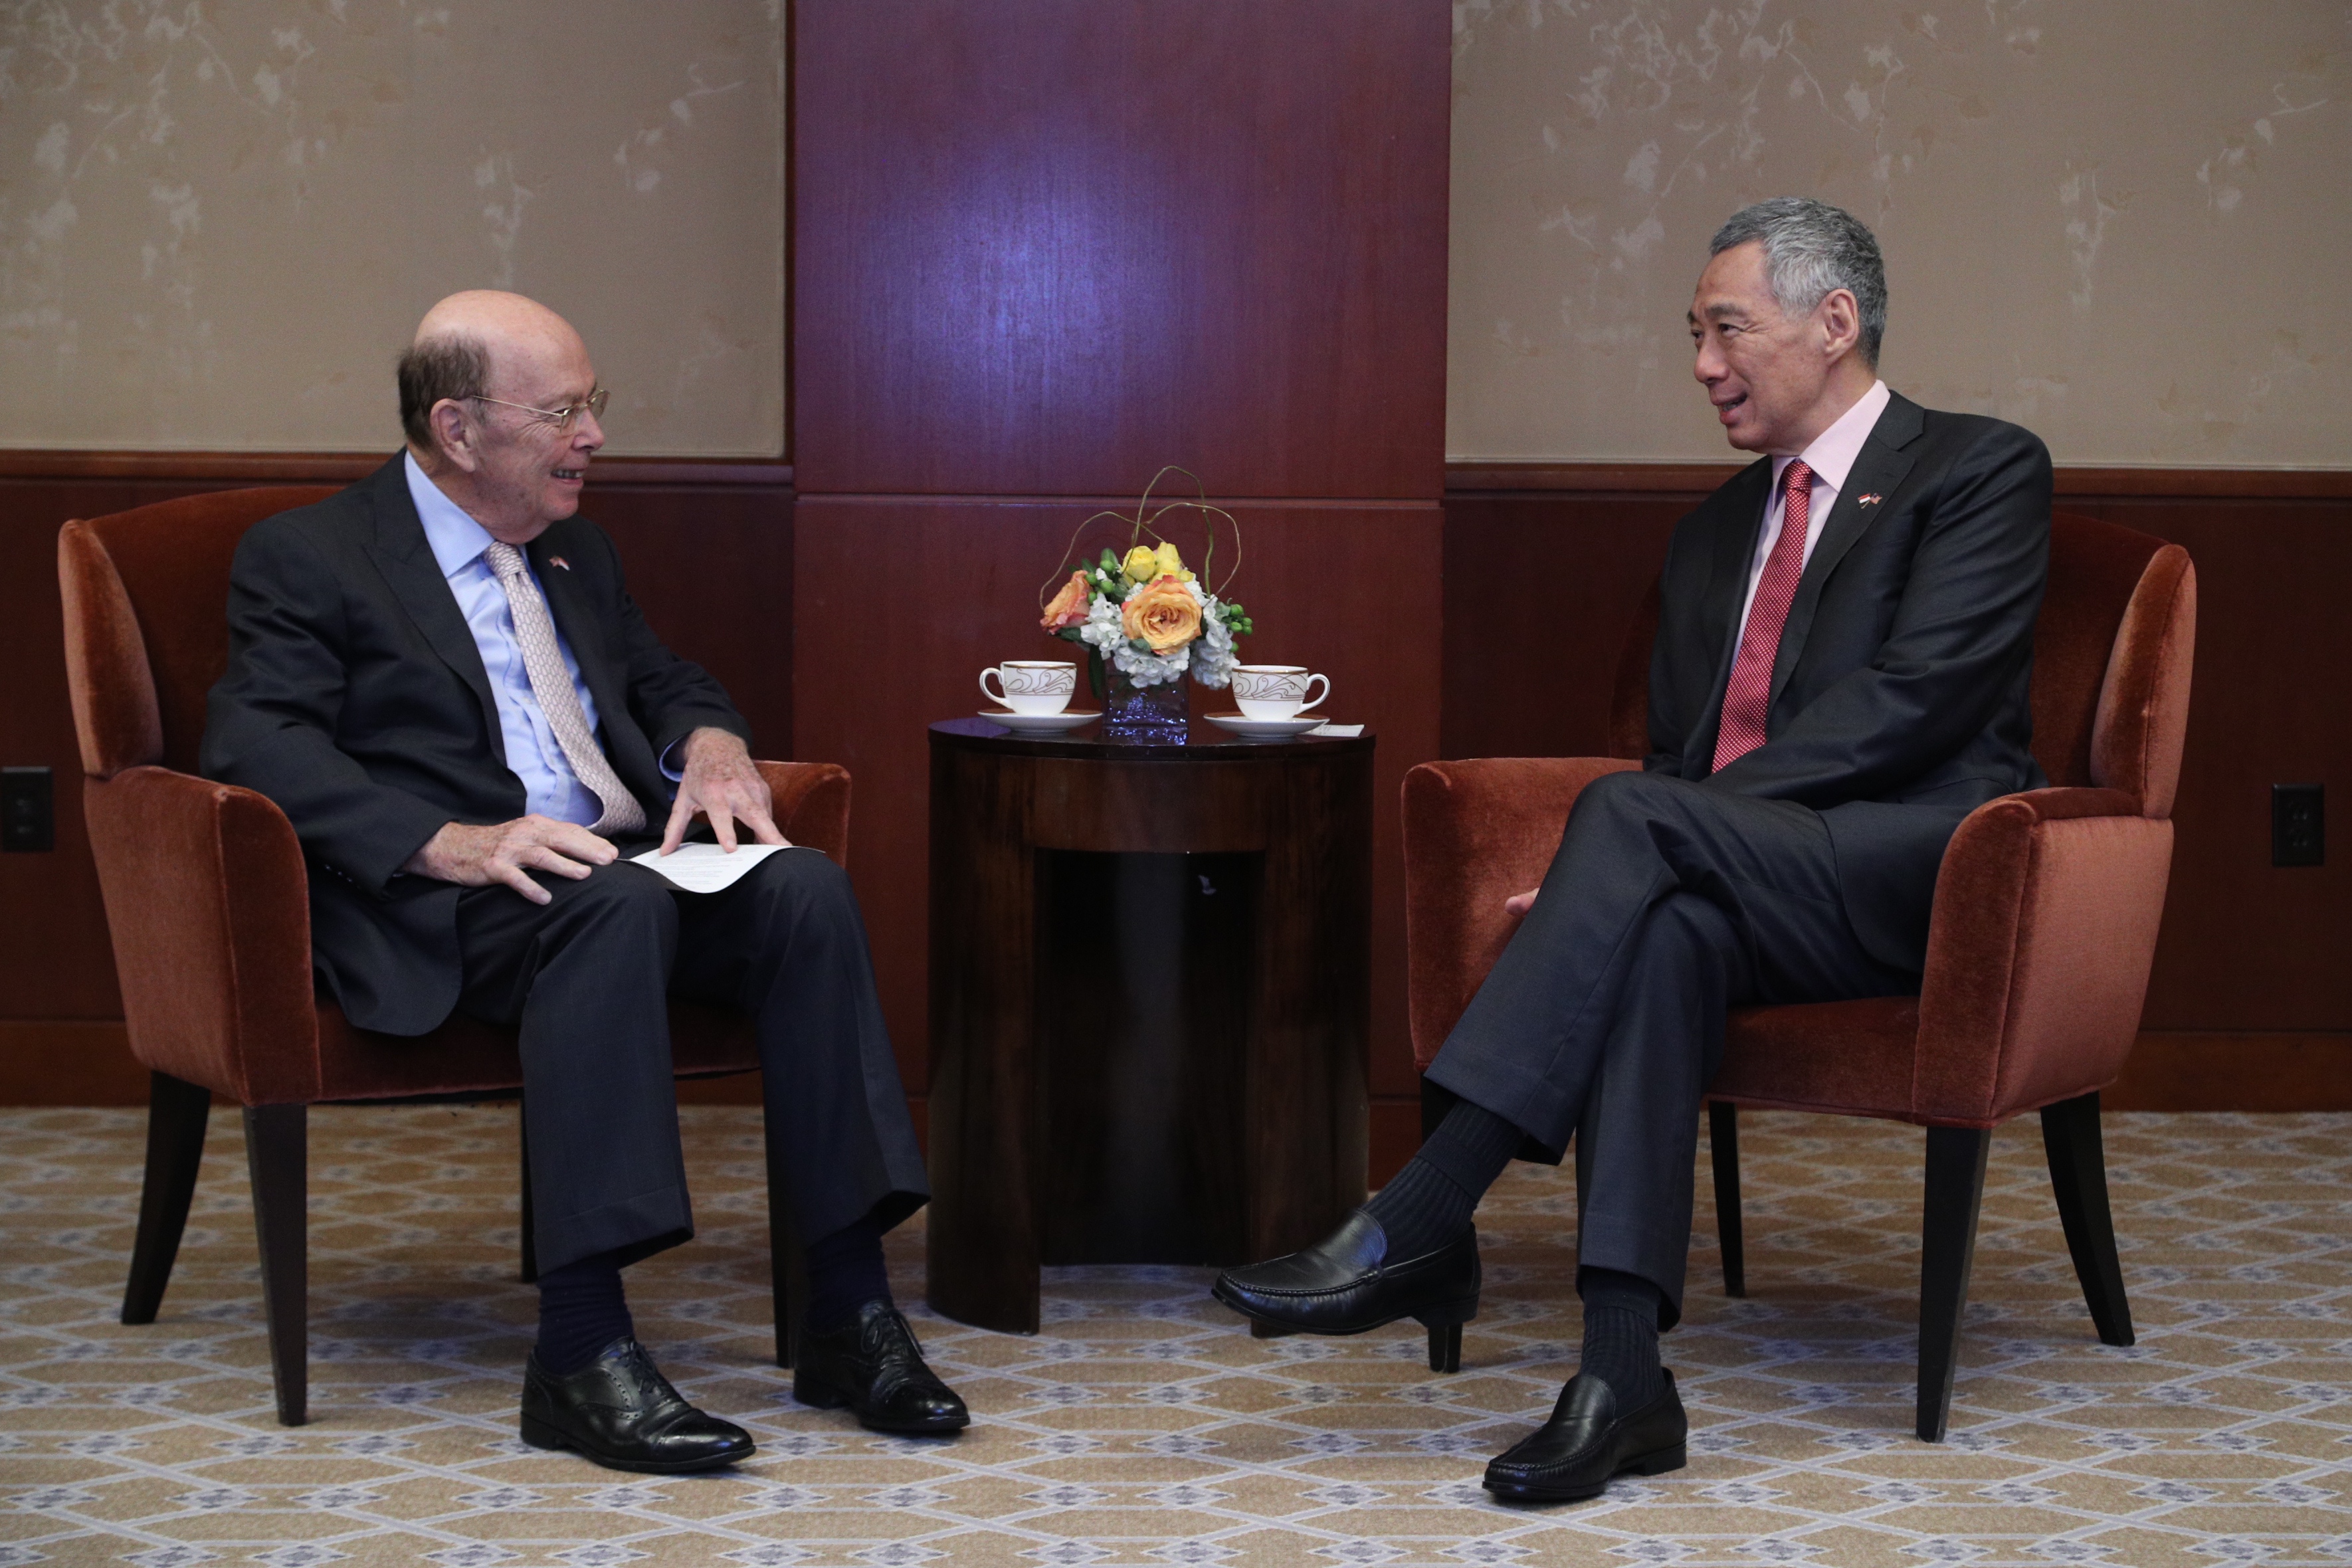 PM Lee Hsien Loong meeting with Secretary of Commerce Wilbur Ross on 26 Oct 2017 (MCI Photo by Kenji Soon)